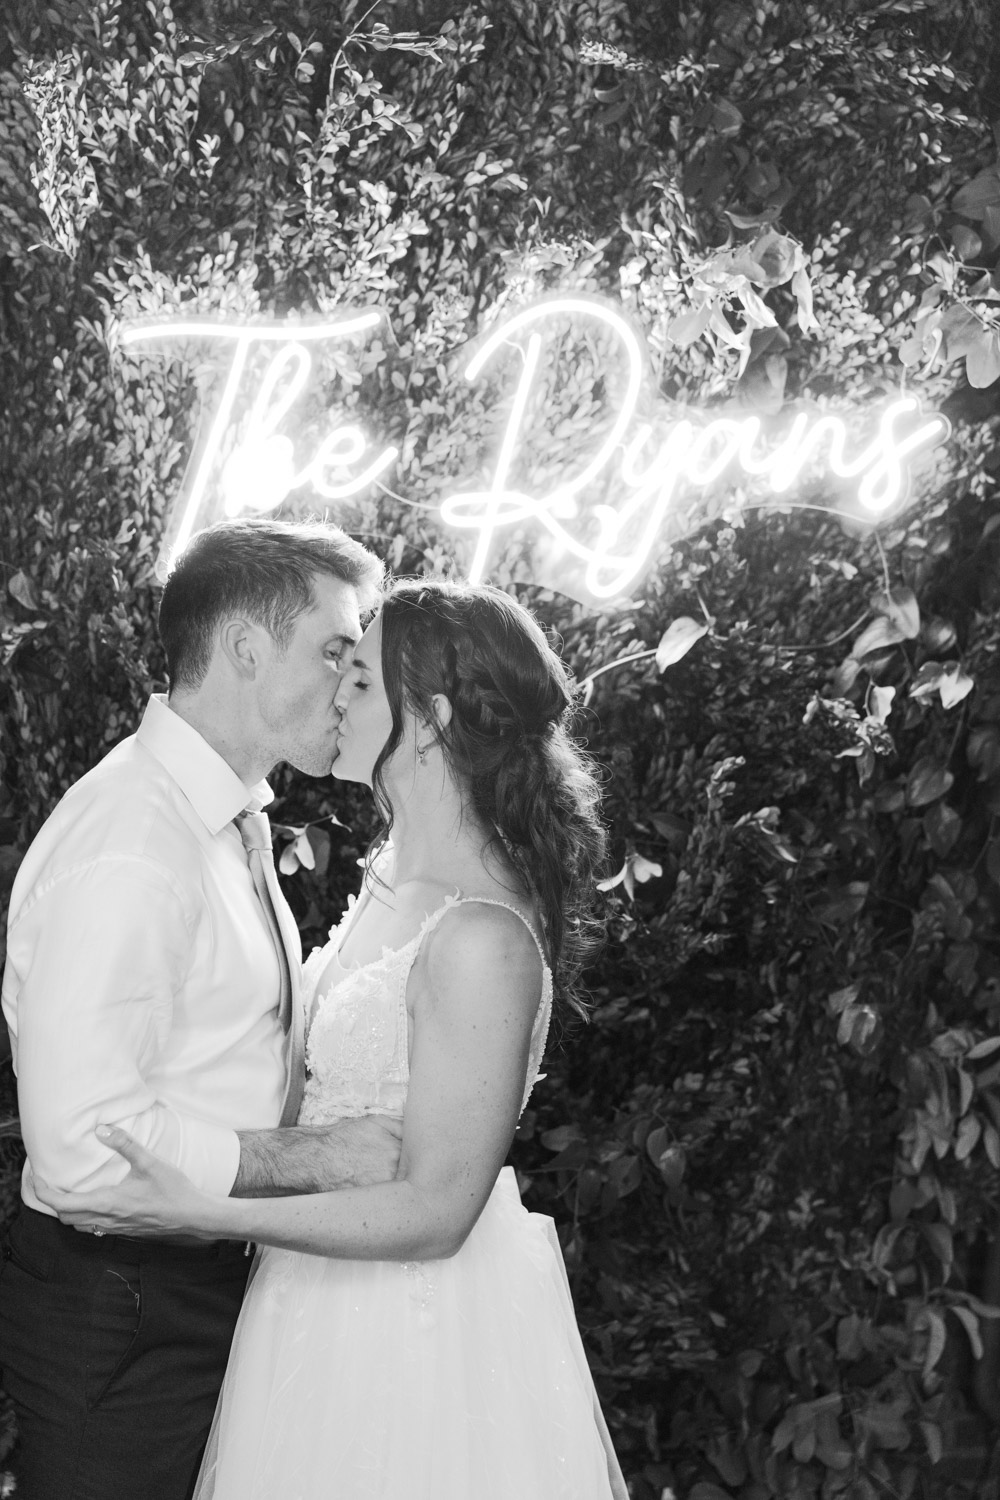 Bride and groom pose in front of custom neon sign on their wedding day